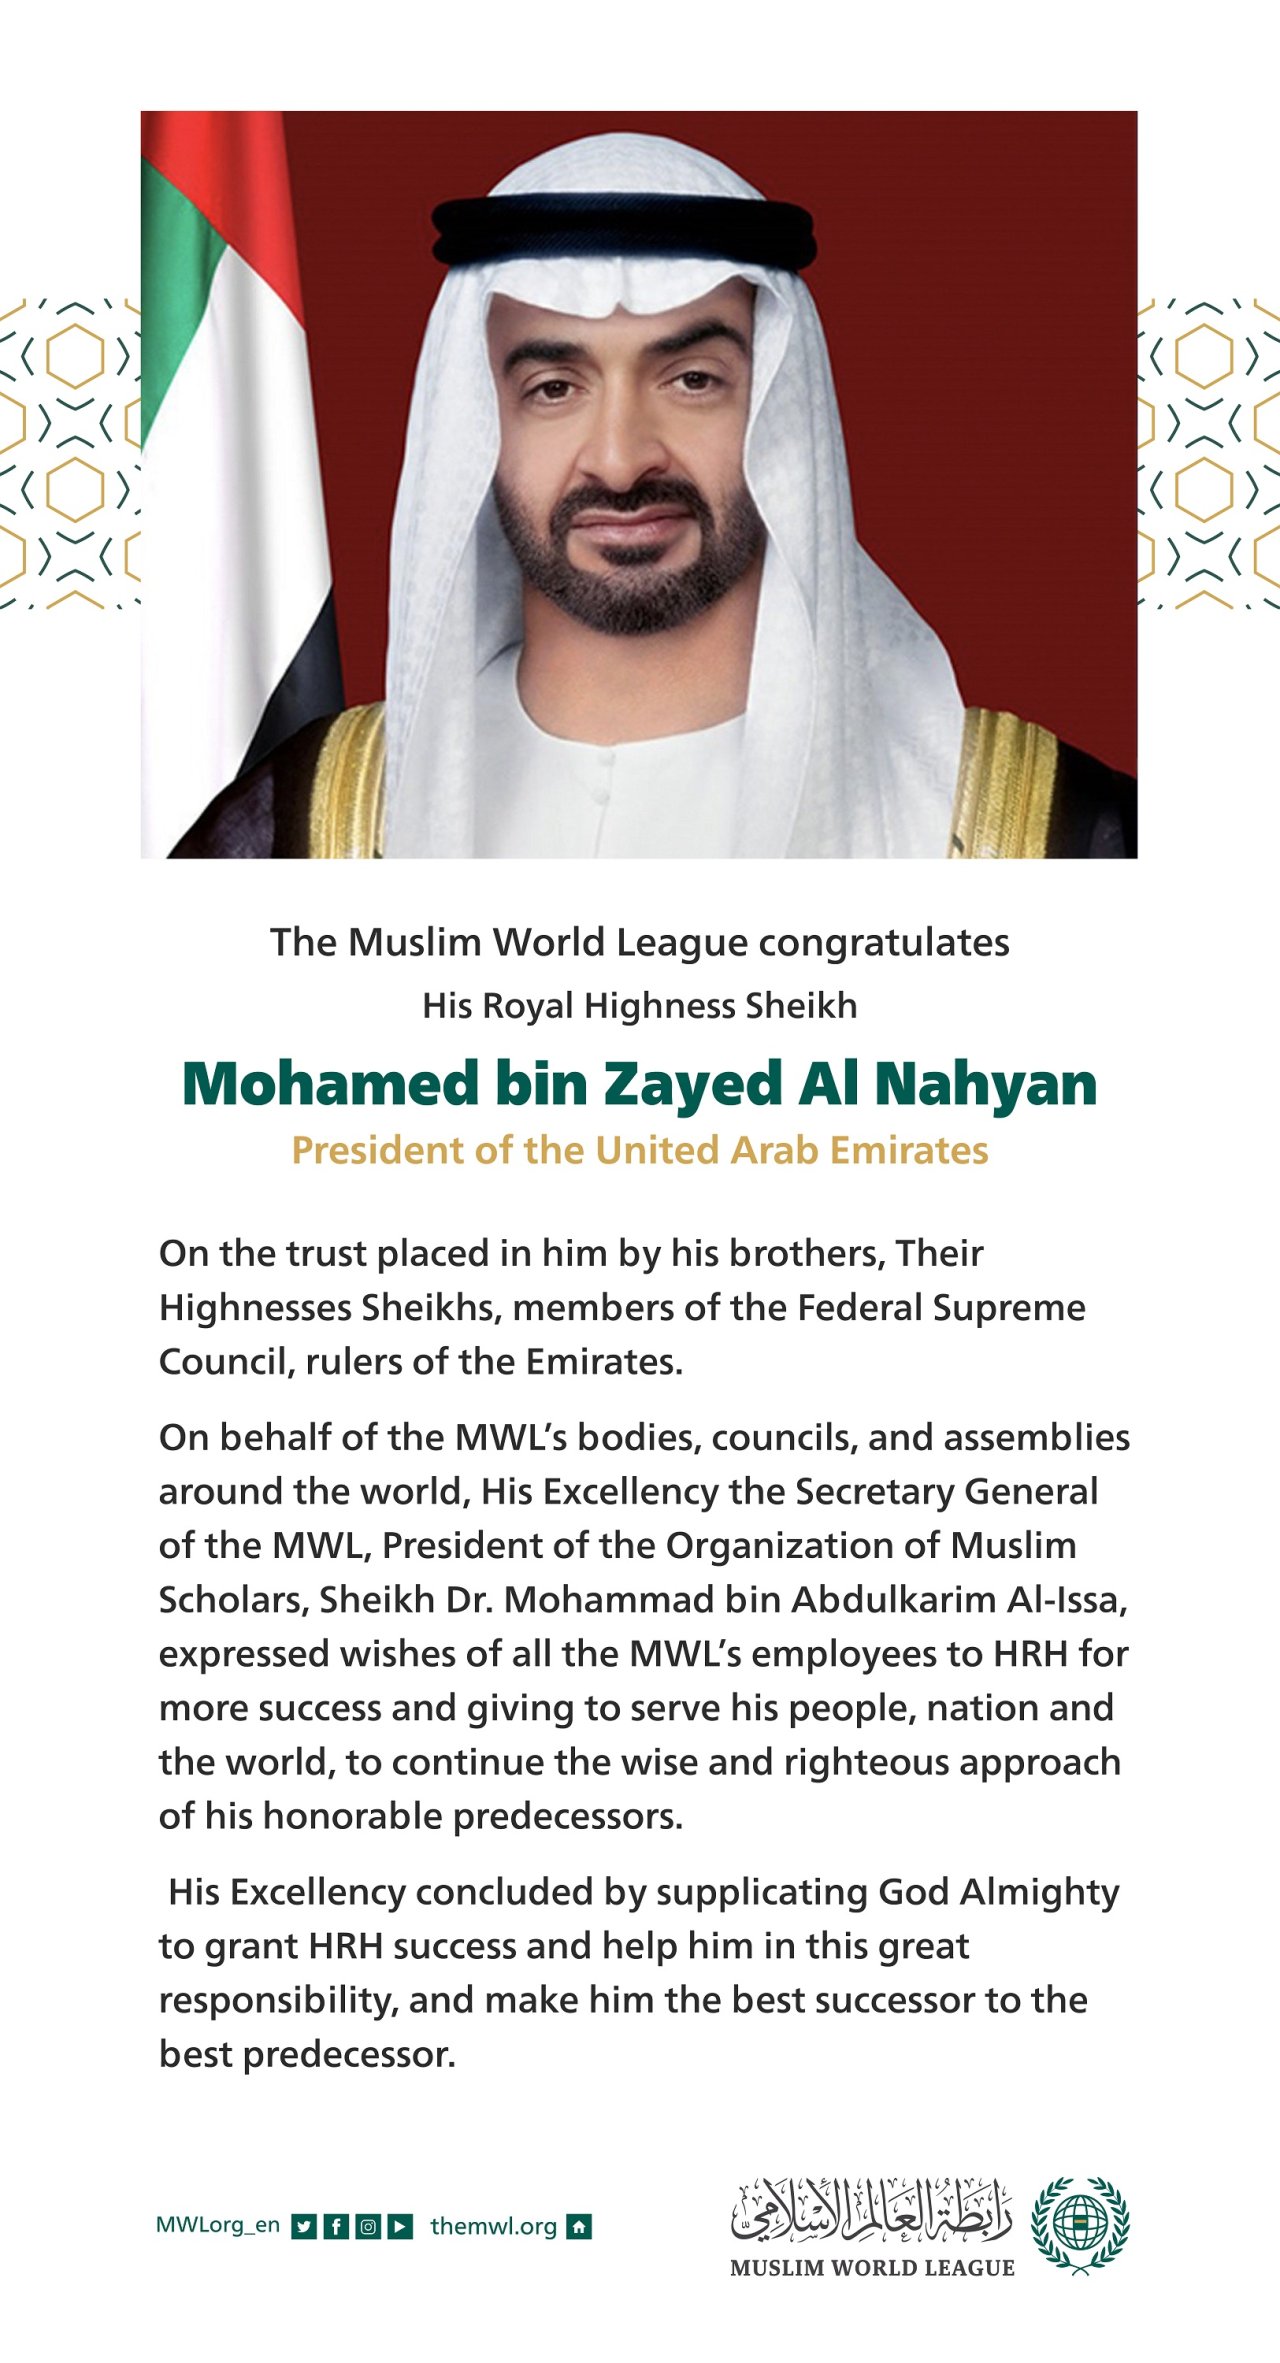 The Muslim World League congratulates His Royal Highness Sheikh Mohamed bin Zayed Al Nahyan on his election as the President of the United Arab Emirates.